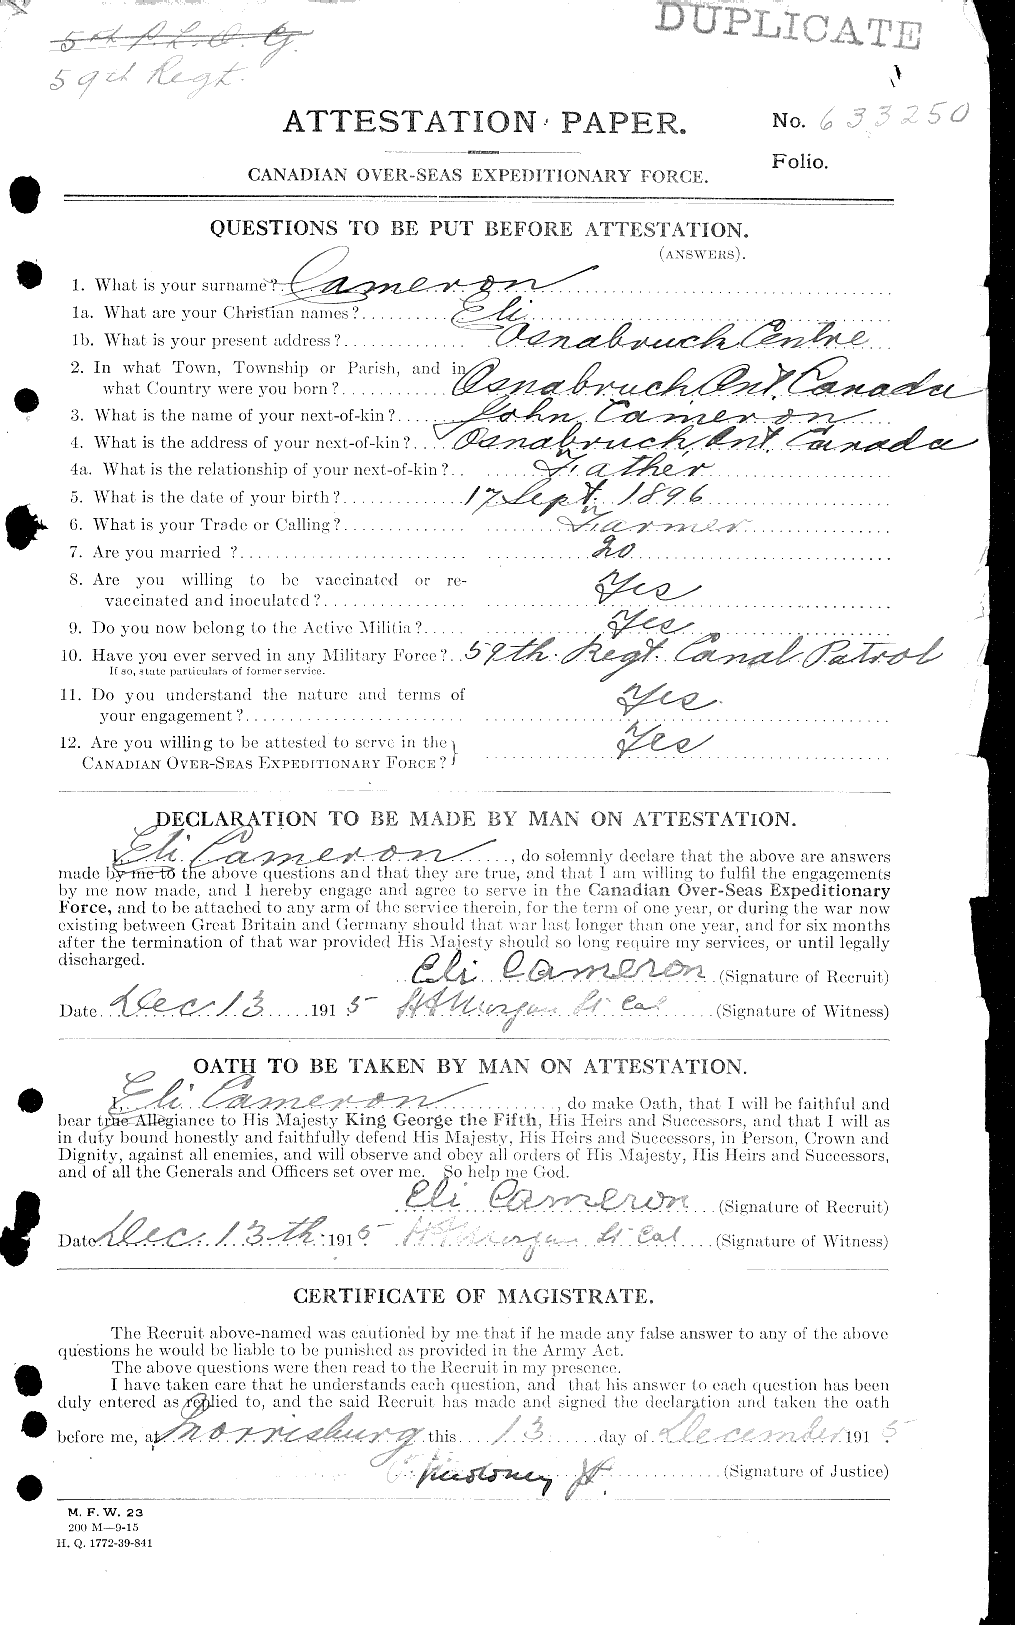 Personnel Records of the First World War - CEF 006529a